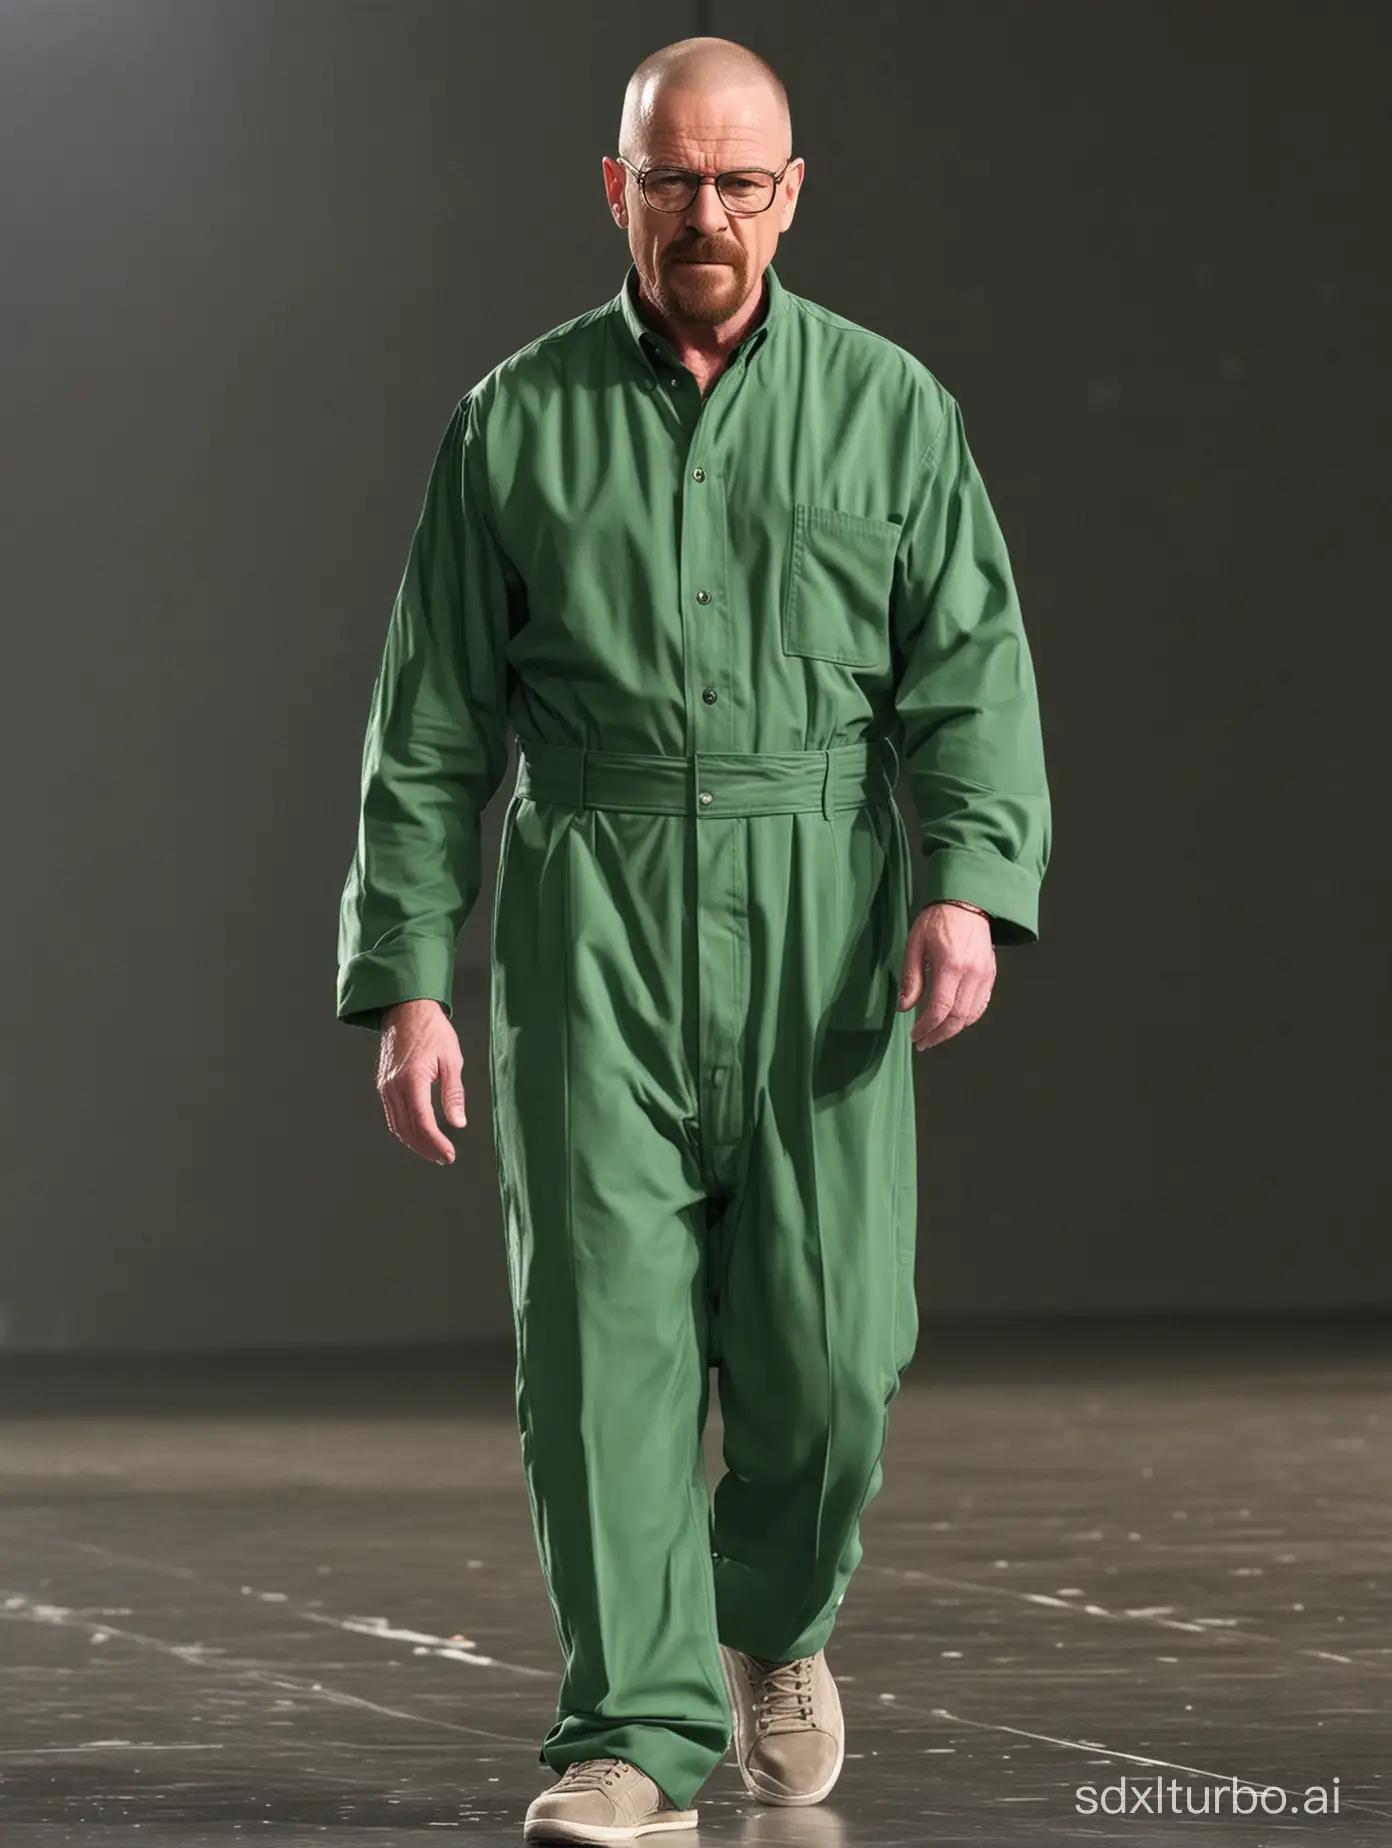 Walter White from Breaking Bad walks the runway wearing a green outfit.